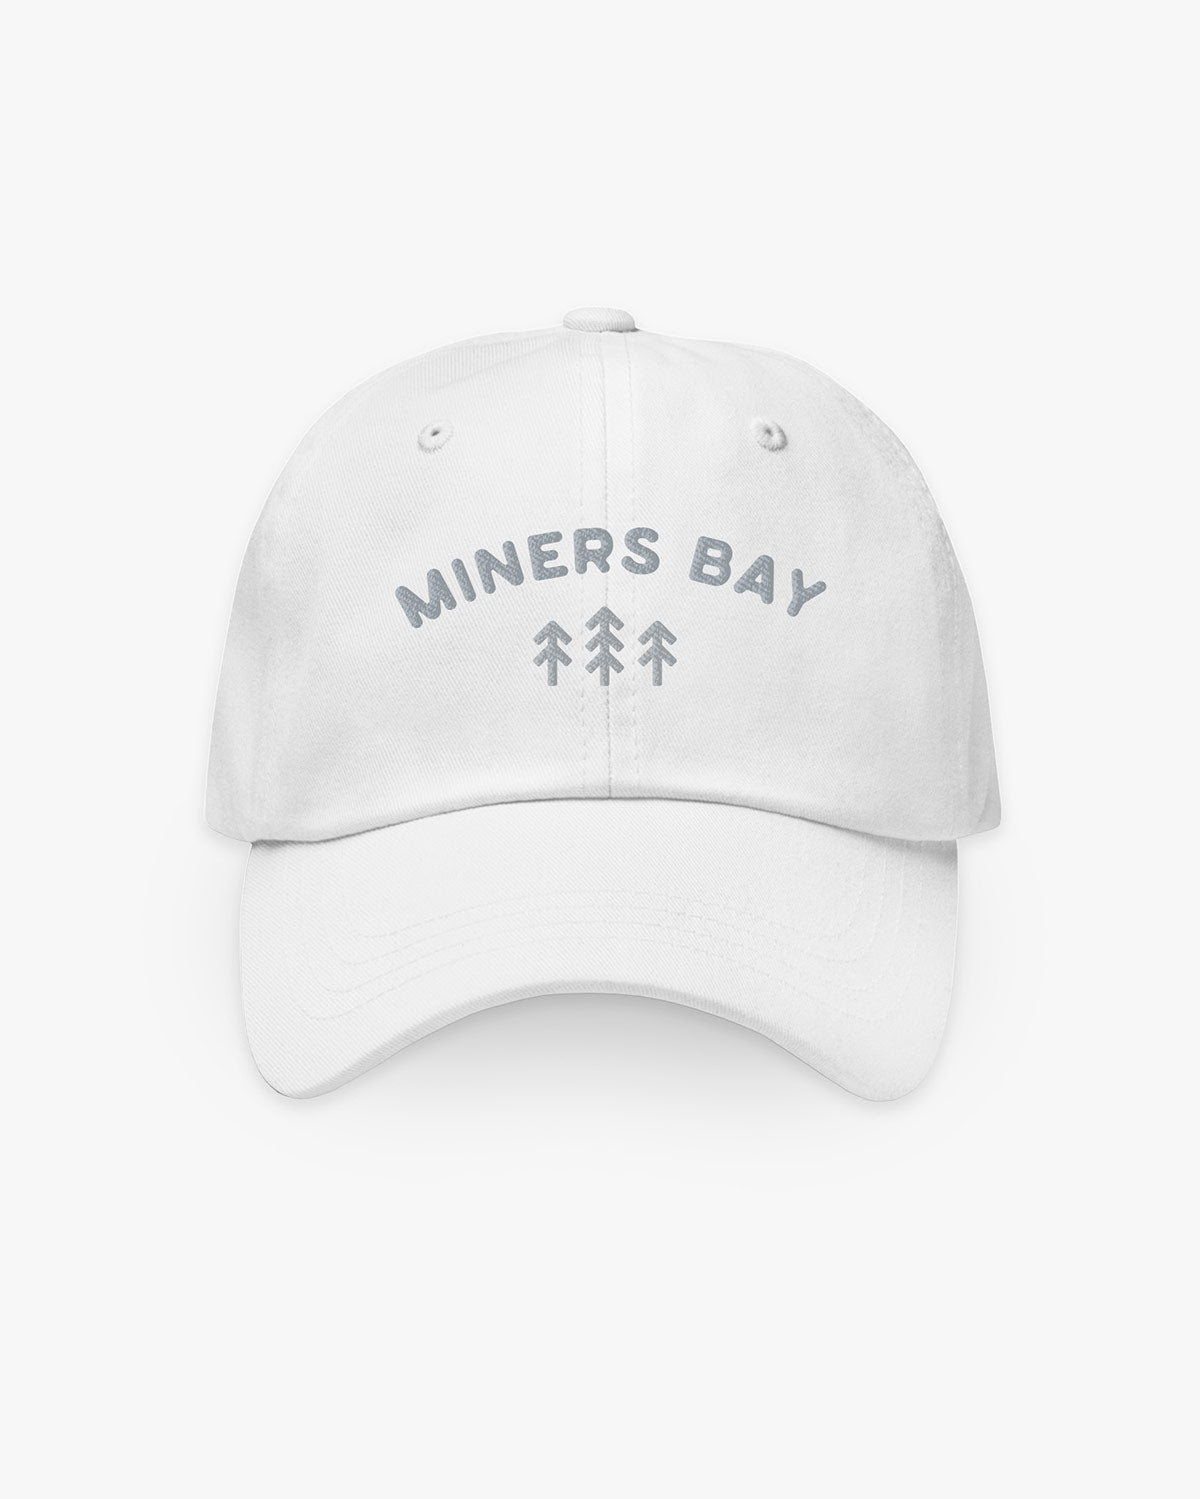 Trees - Miners Bay - Hat